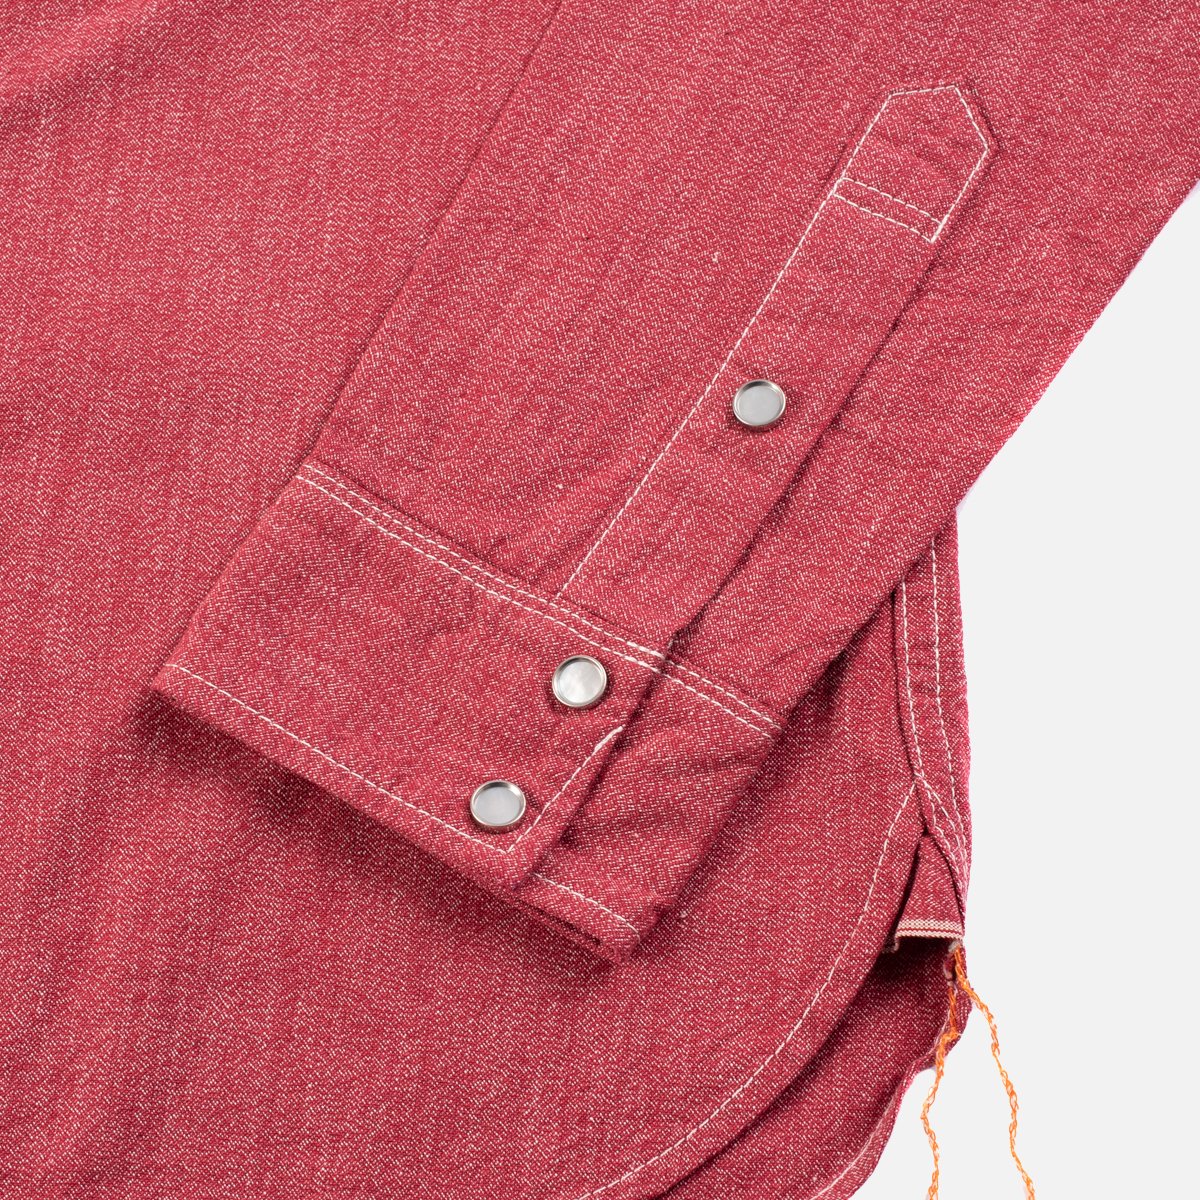 IronHeart 10oz Mock Twist Selvedge Chambray Western Shirt - Red 'The Salt And Cayenne'